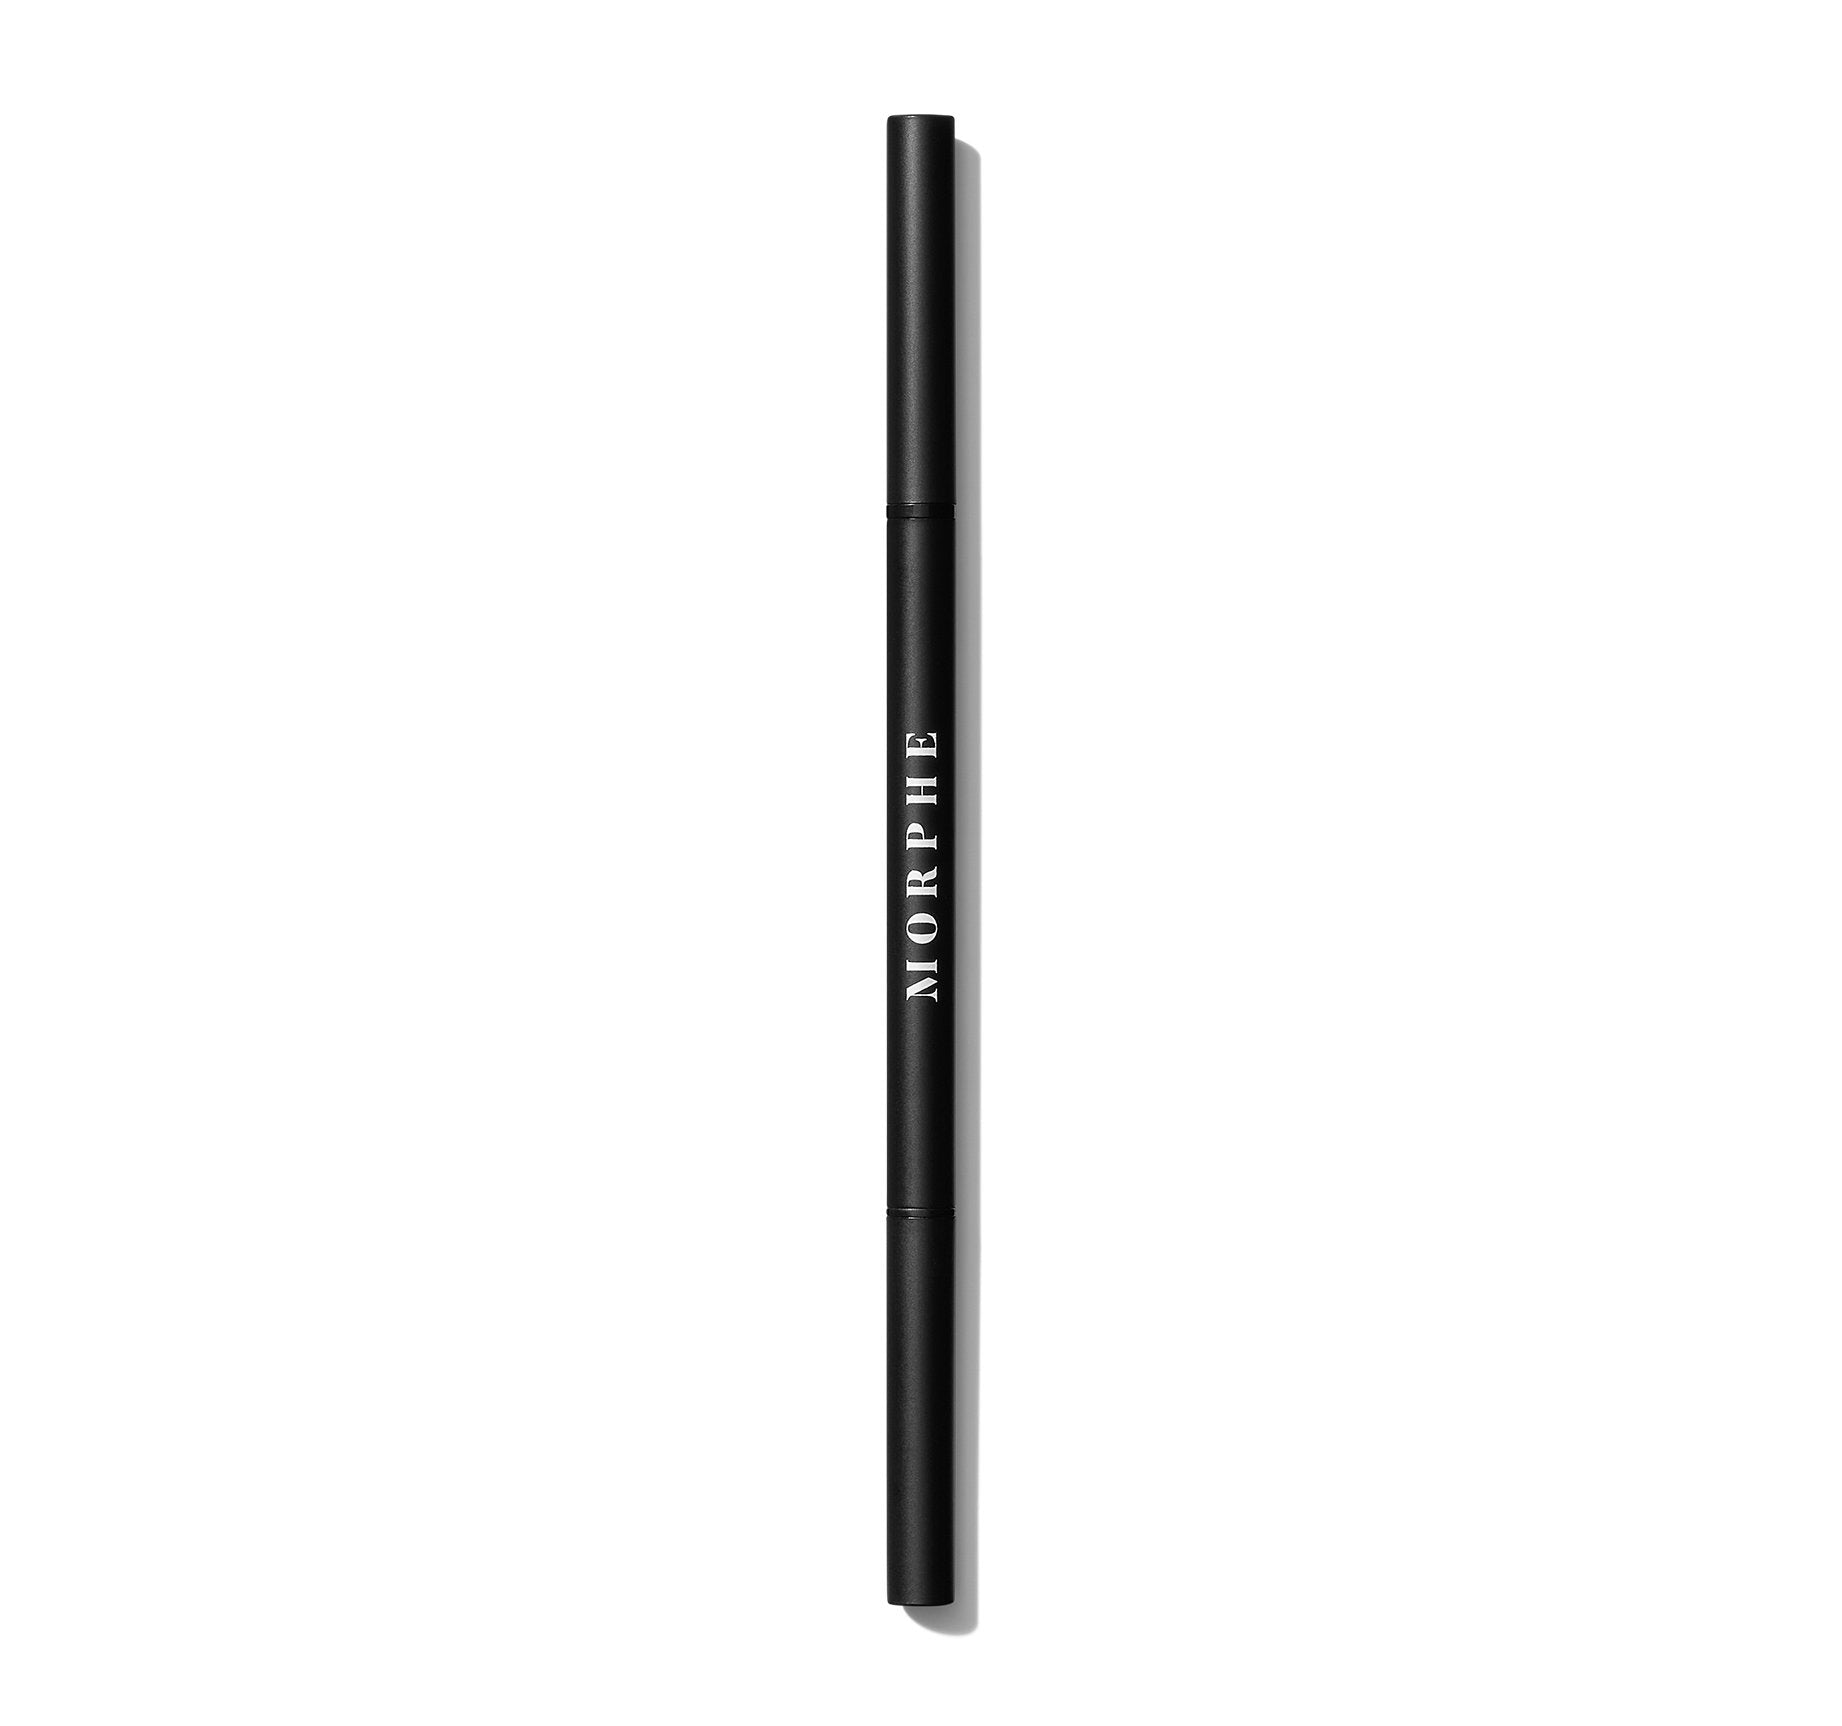 Definer Dual-Ended Brow Pencil & Spoolie - Chocolate Mousse - Image 9